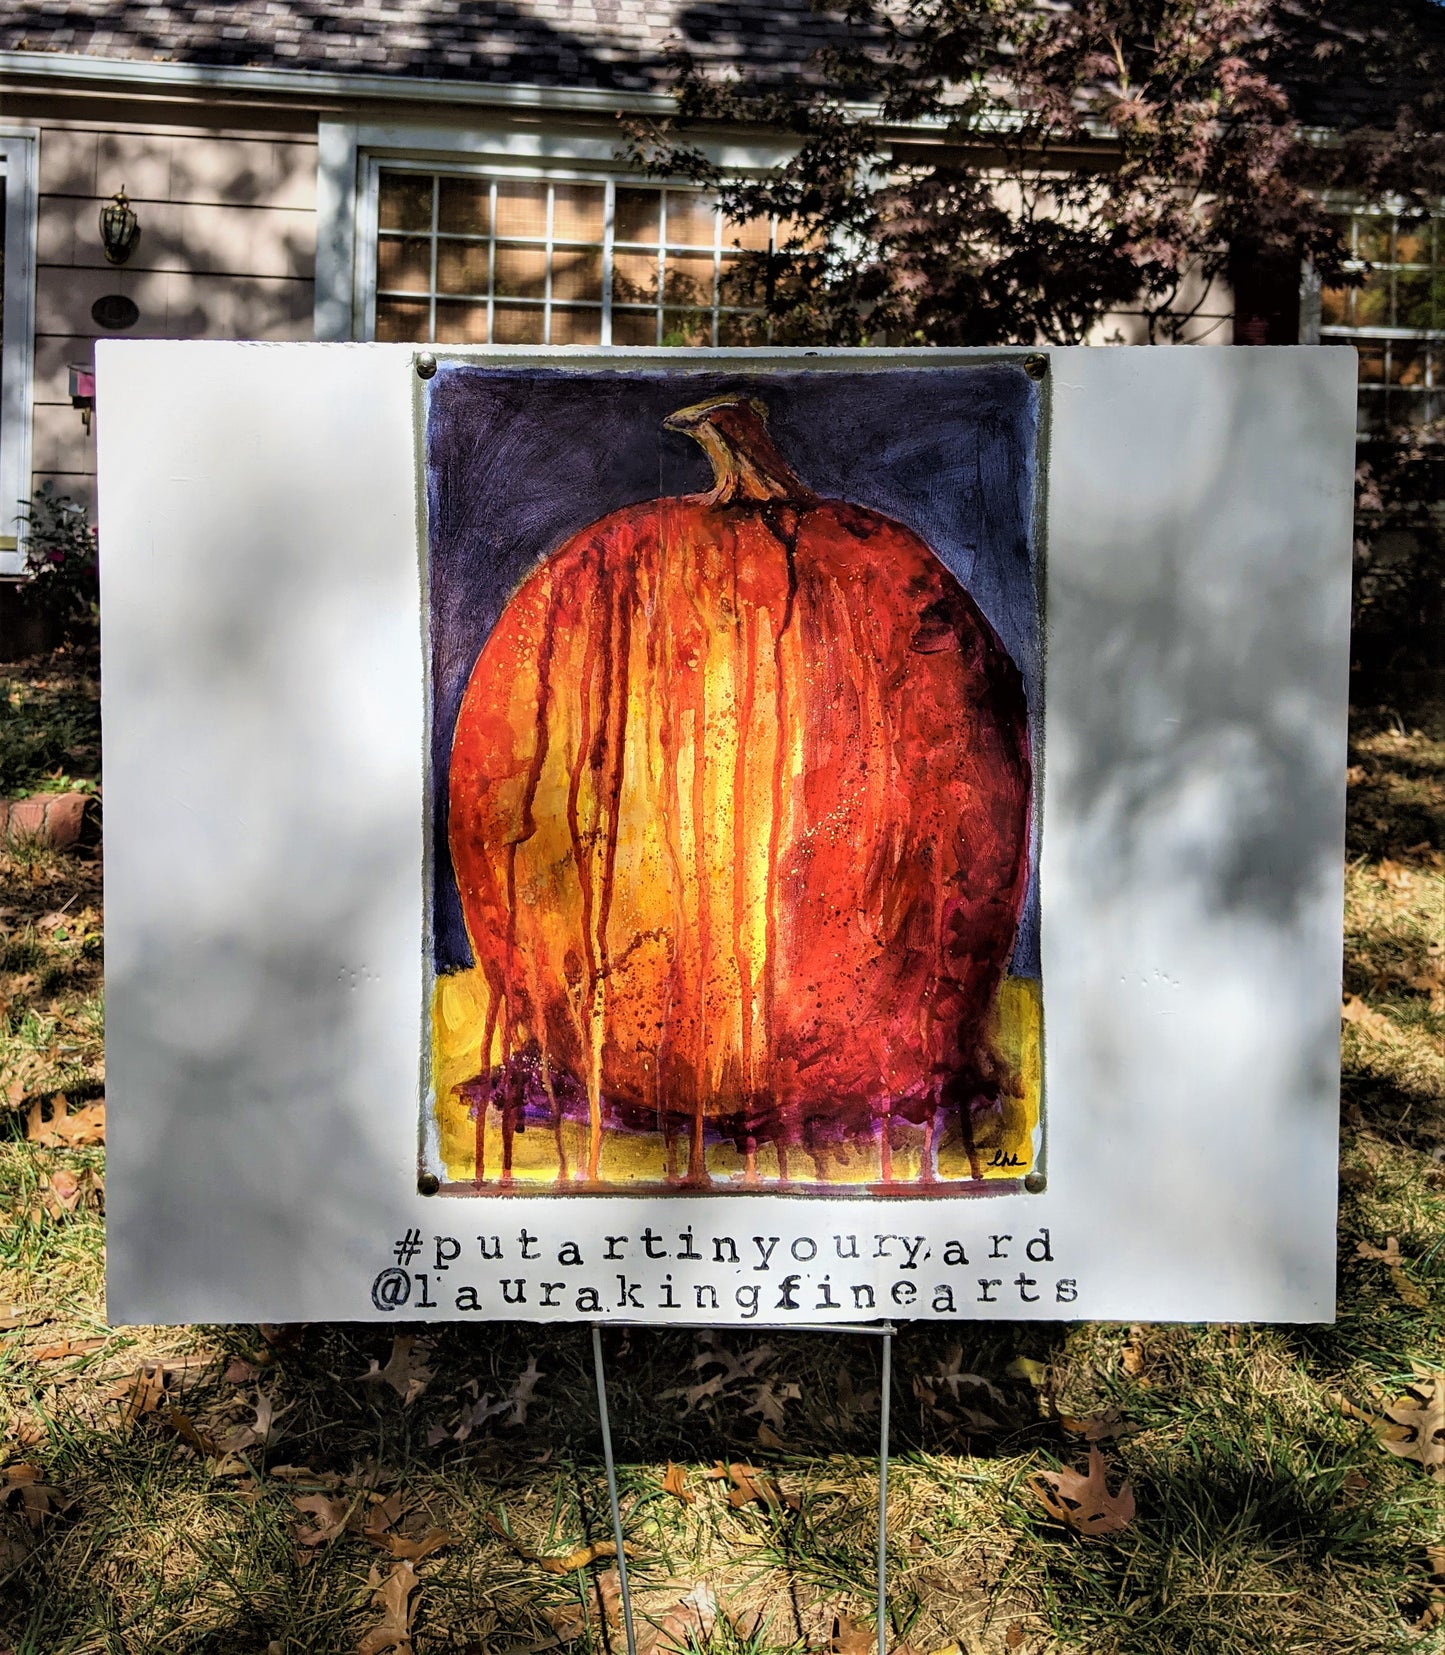 Haunted Pumpkin in the Yard acrylic painting for #putartinyouryard project on cloth